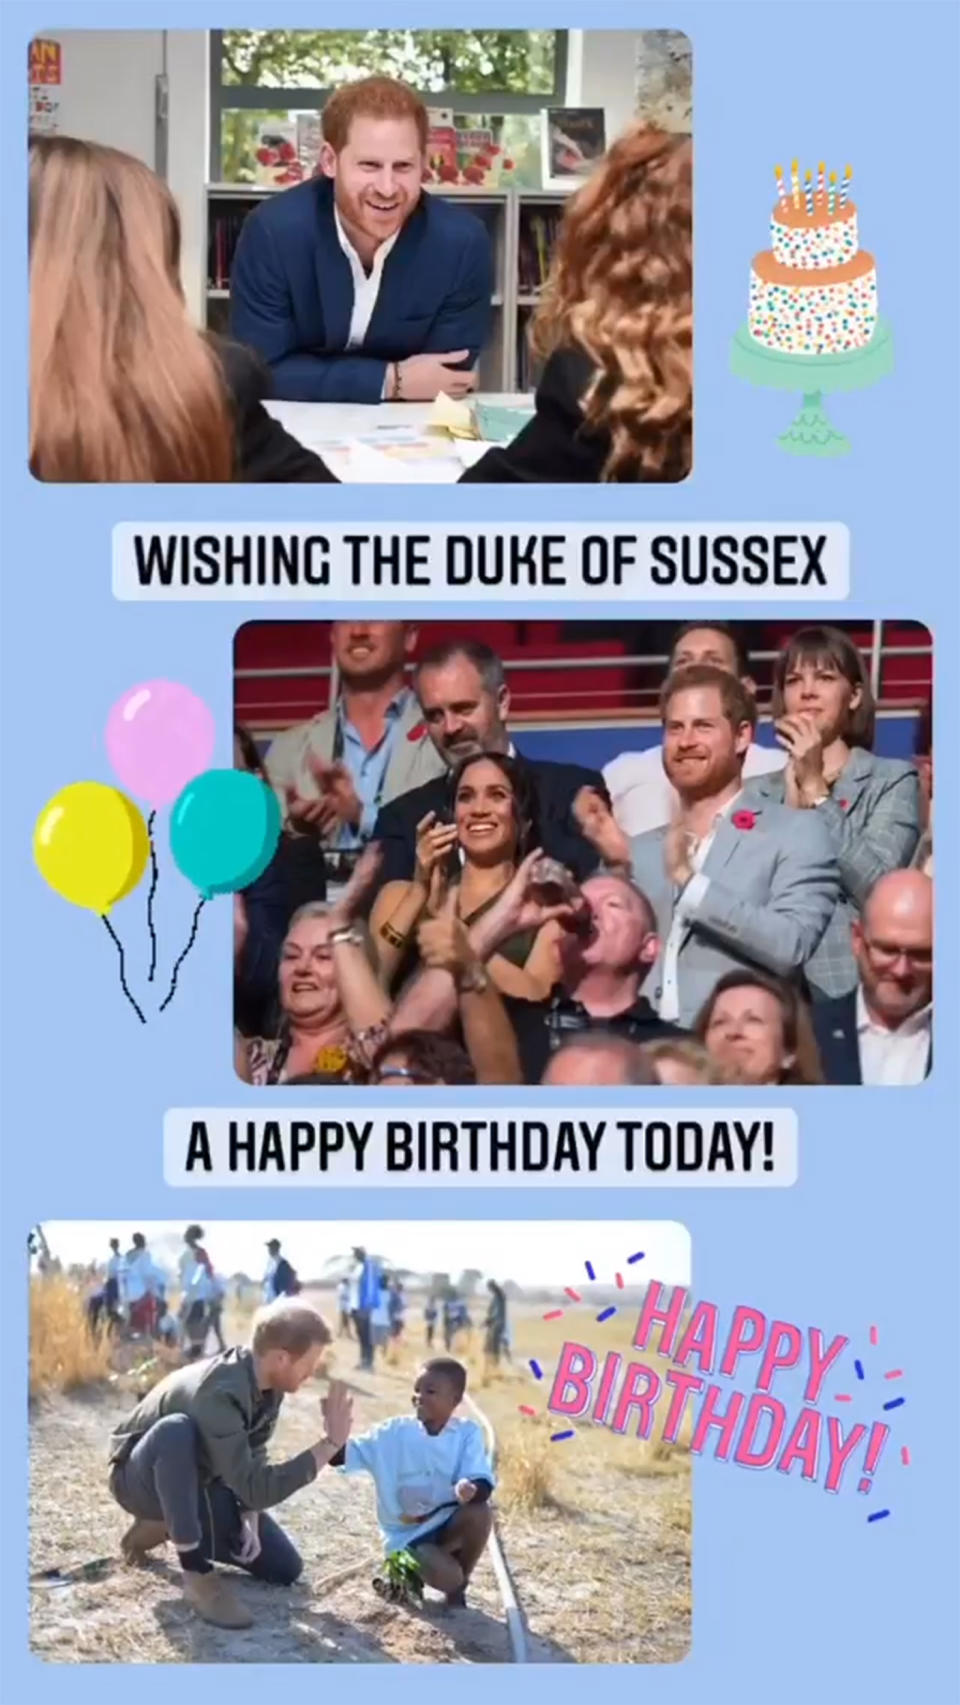 The royal family's official Instagram account didn't forget the Duke of Sussex's birthday, either. (theroyalfamily / Instagram)